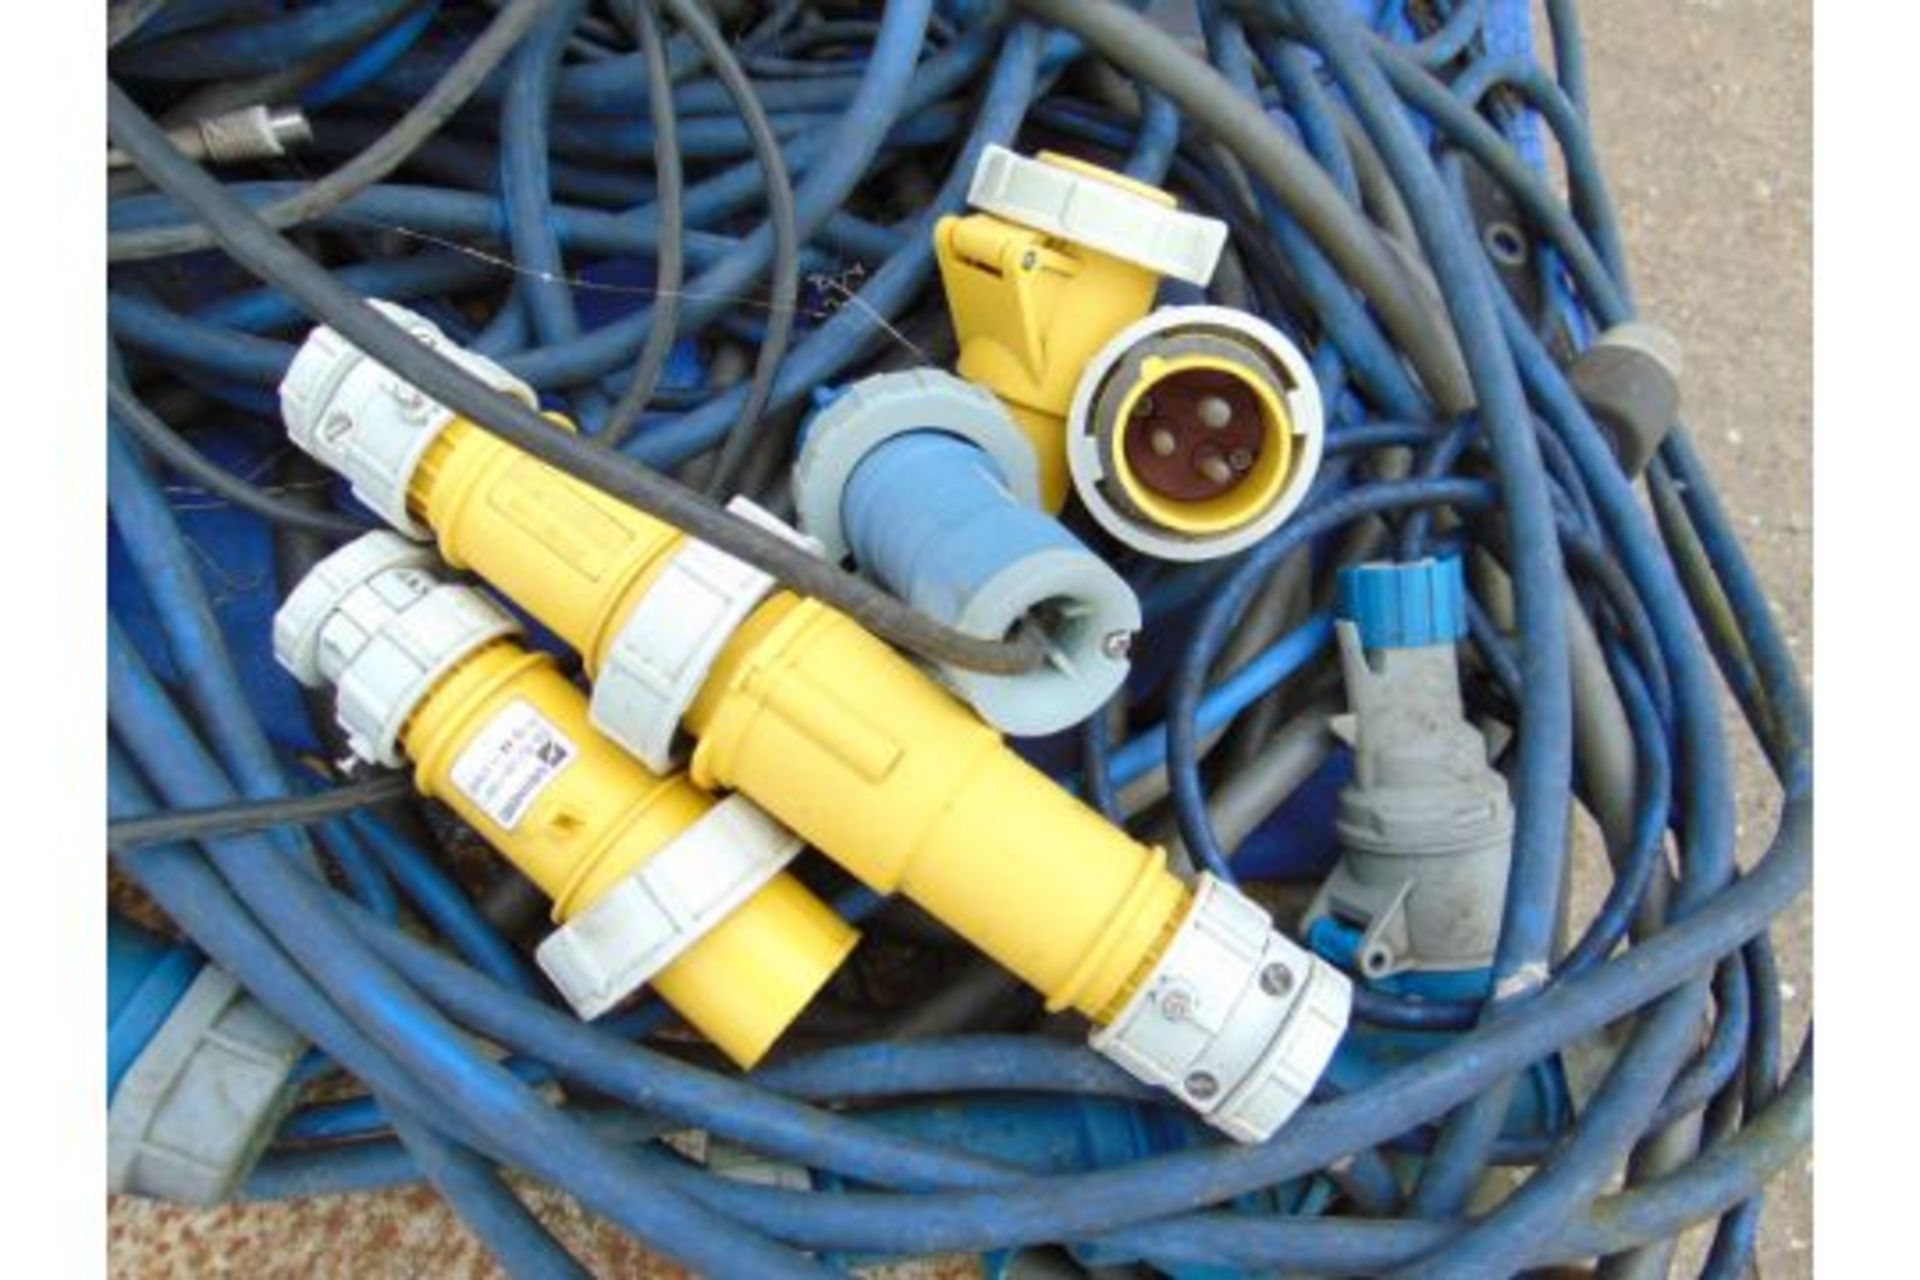 Mixed Electrical Power Cables, Connectors, Plugs, Sockets etc - Image 2 of 4